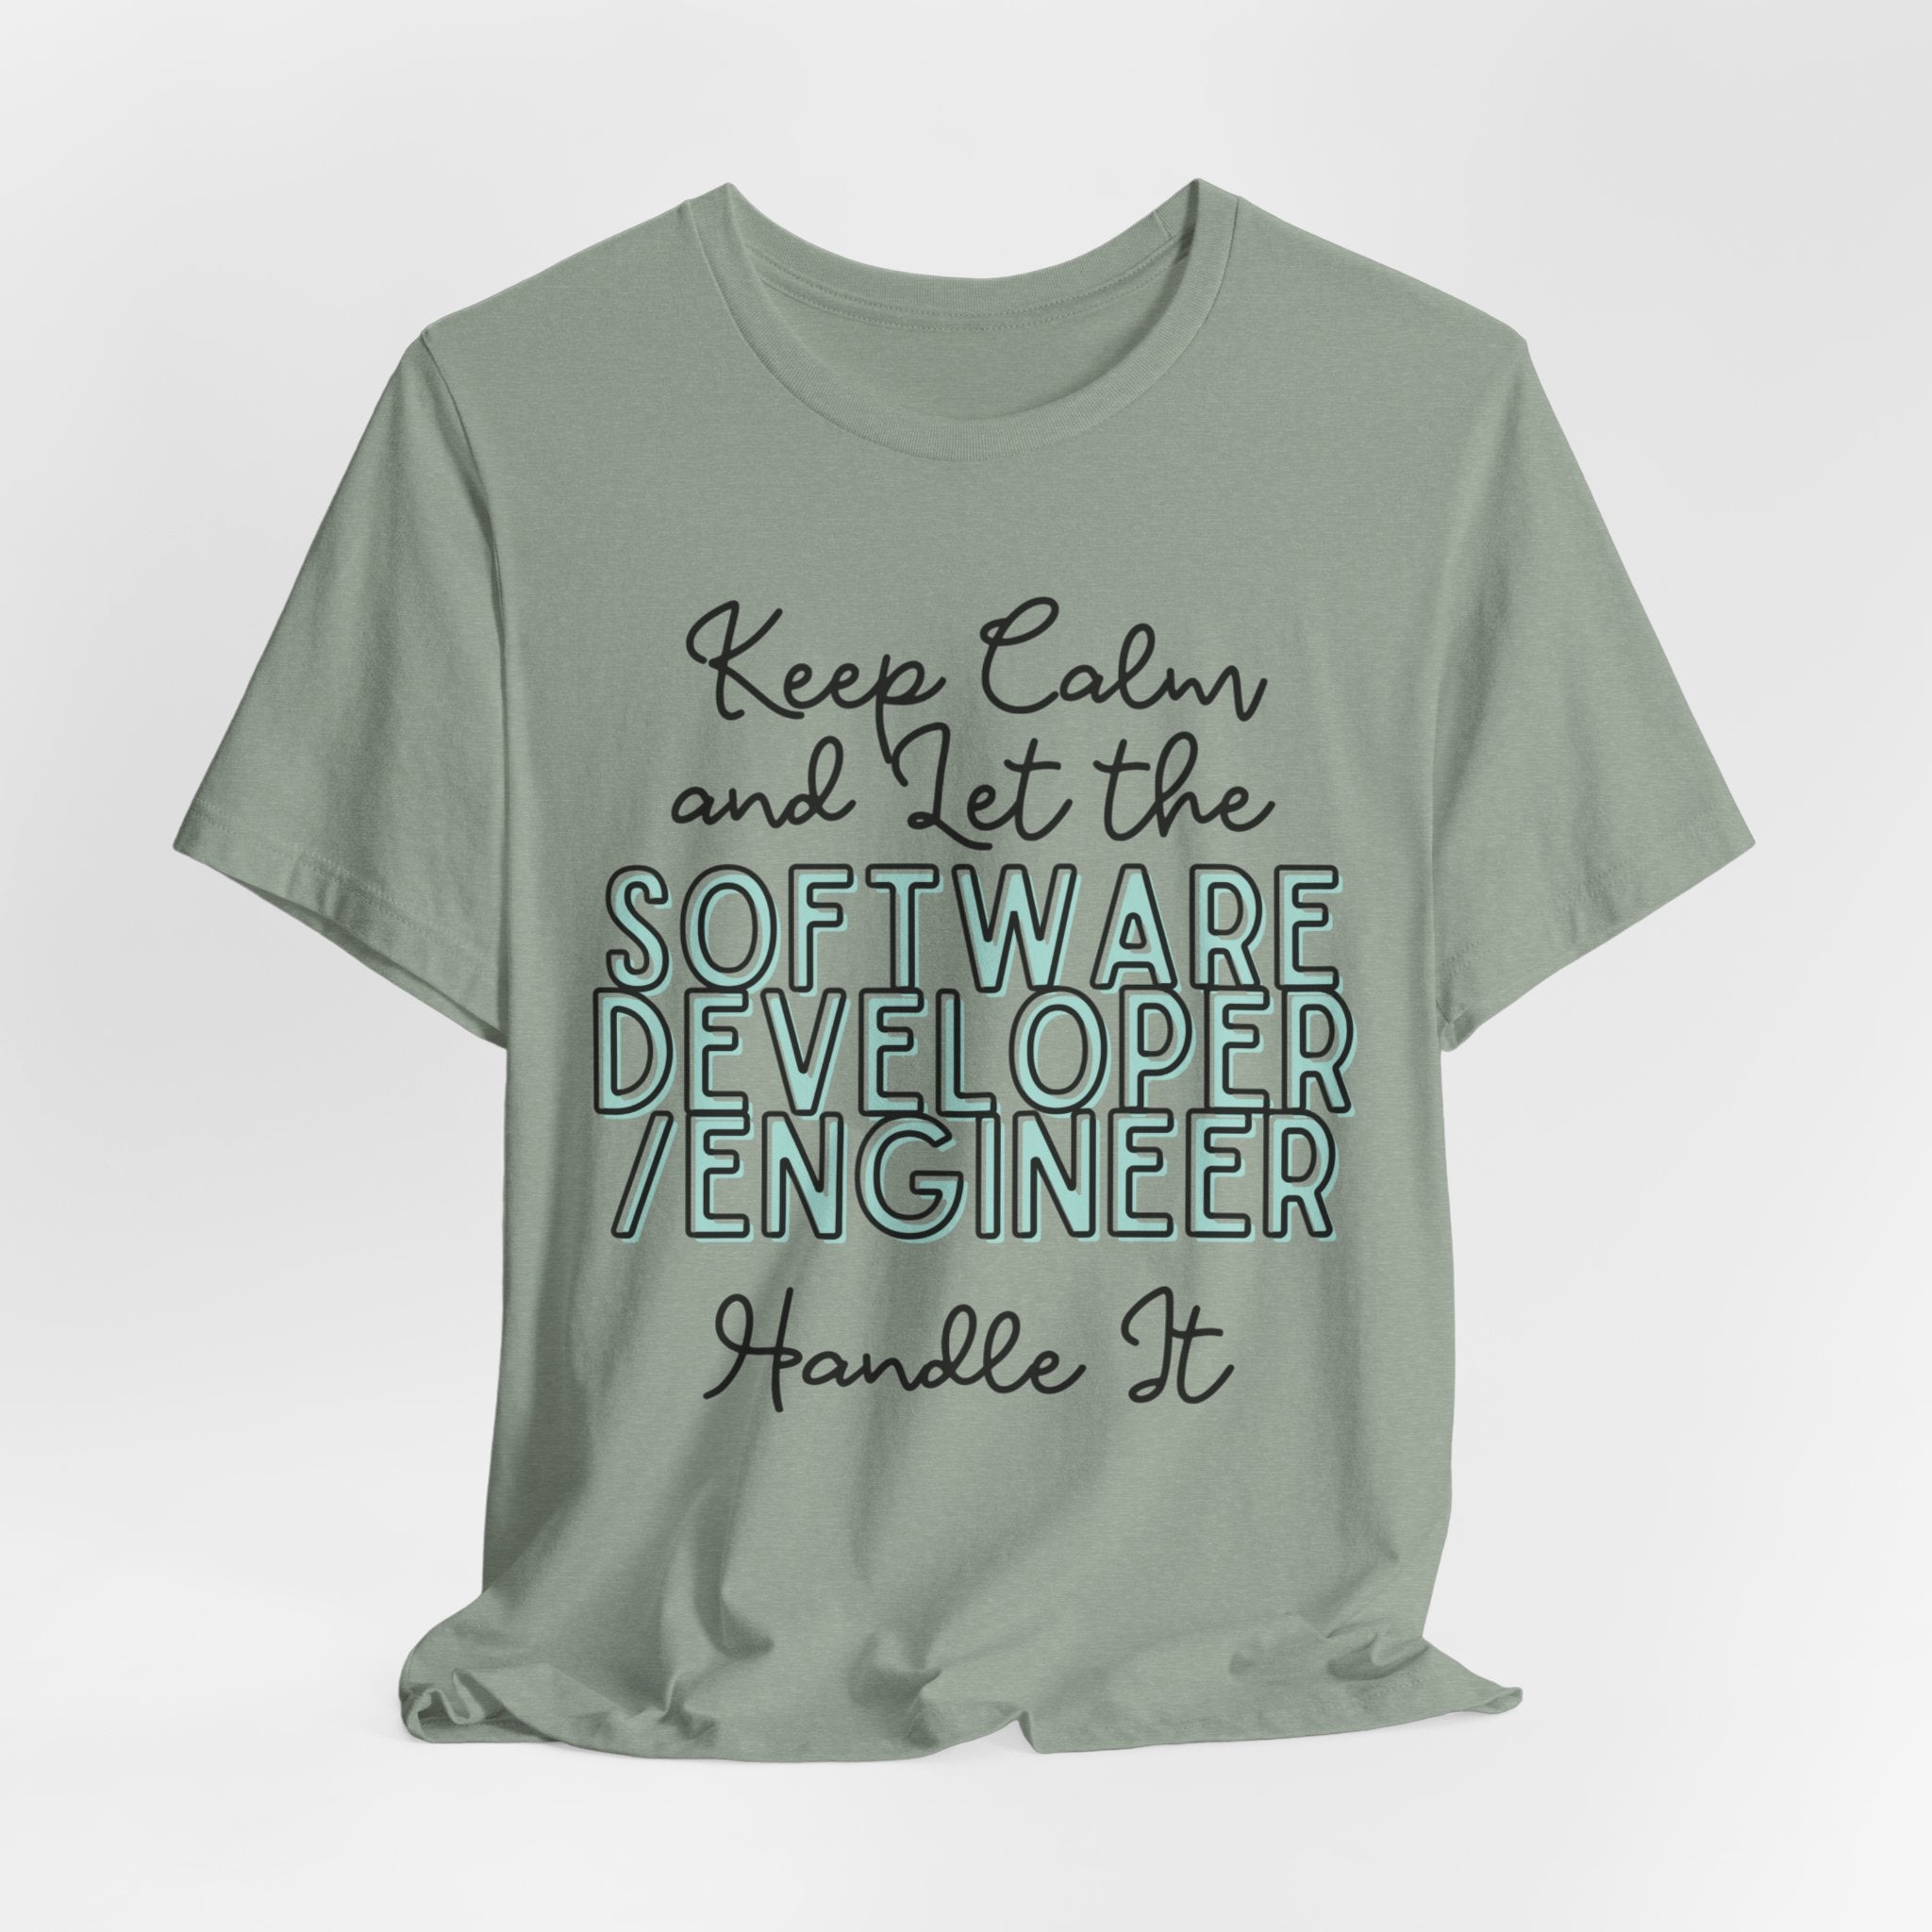 Keep Calm and let the Software Developer / Engineer handle It - Jersey Short Sleeve Tee